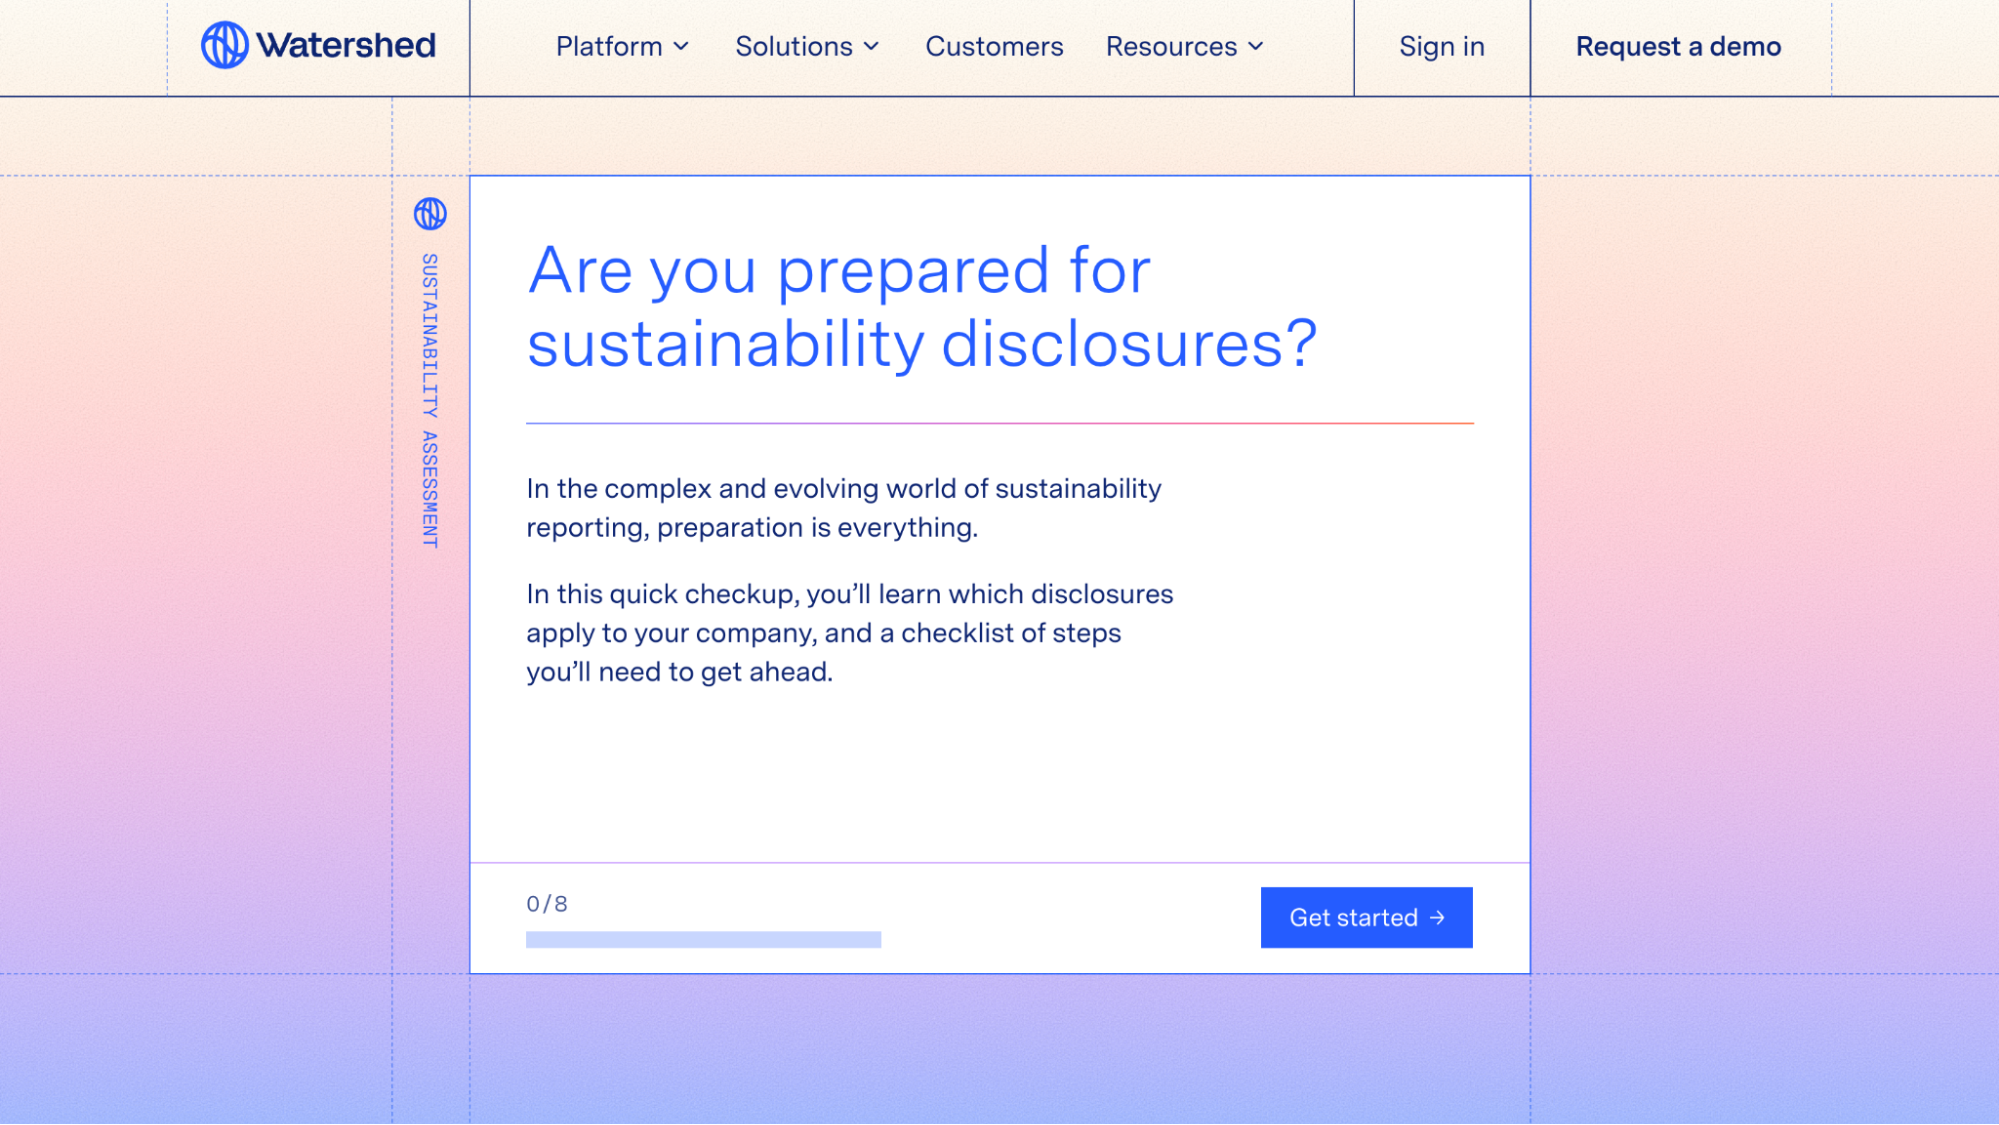 An image showing Watershed's sustainability disclosures quiz